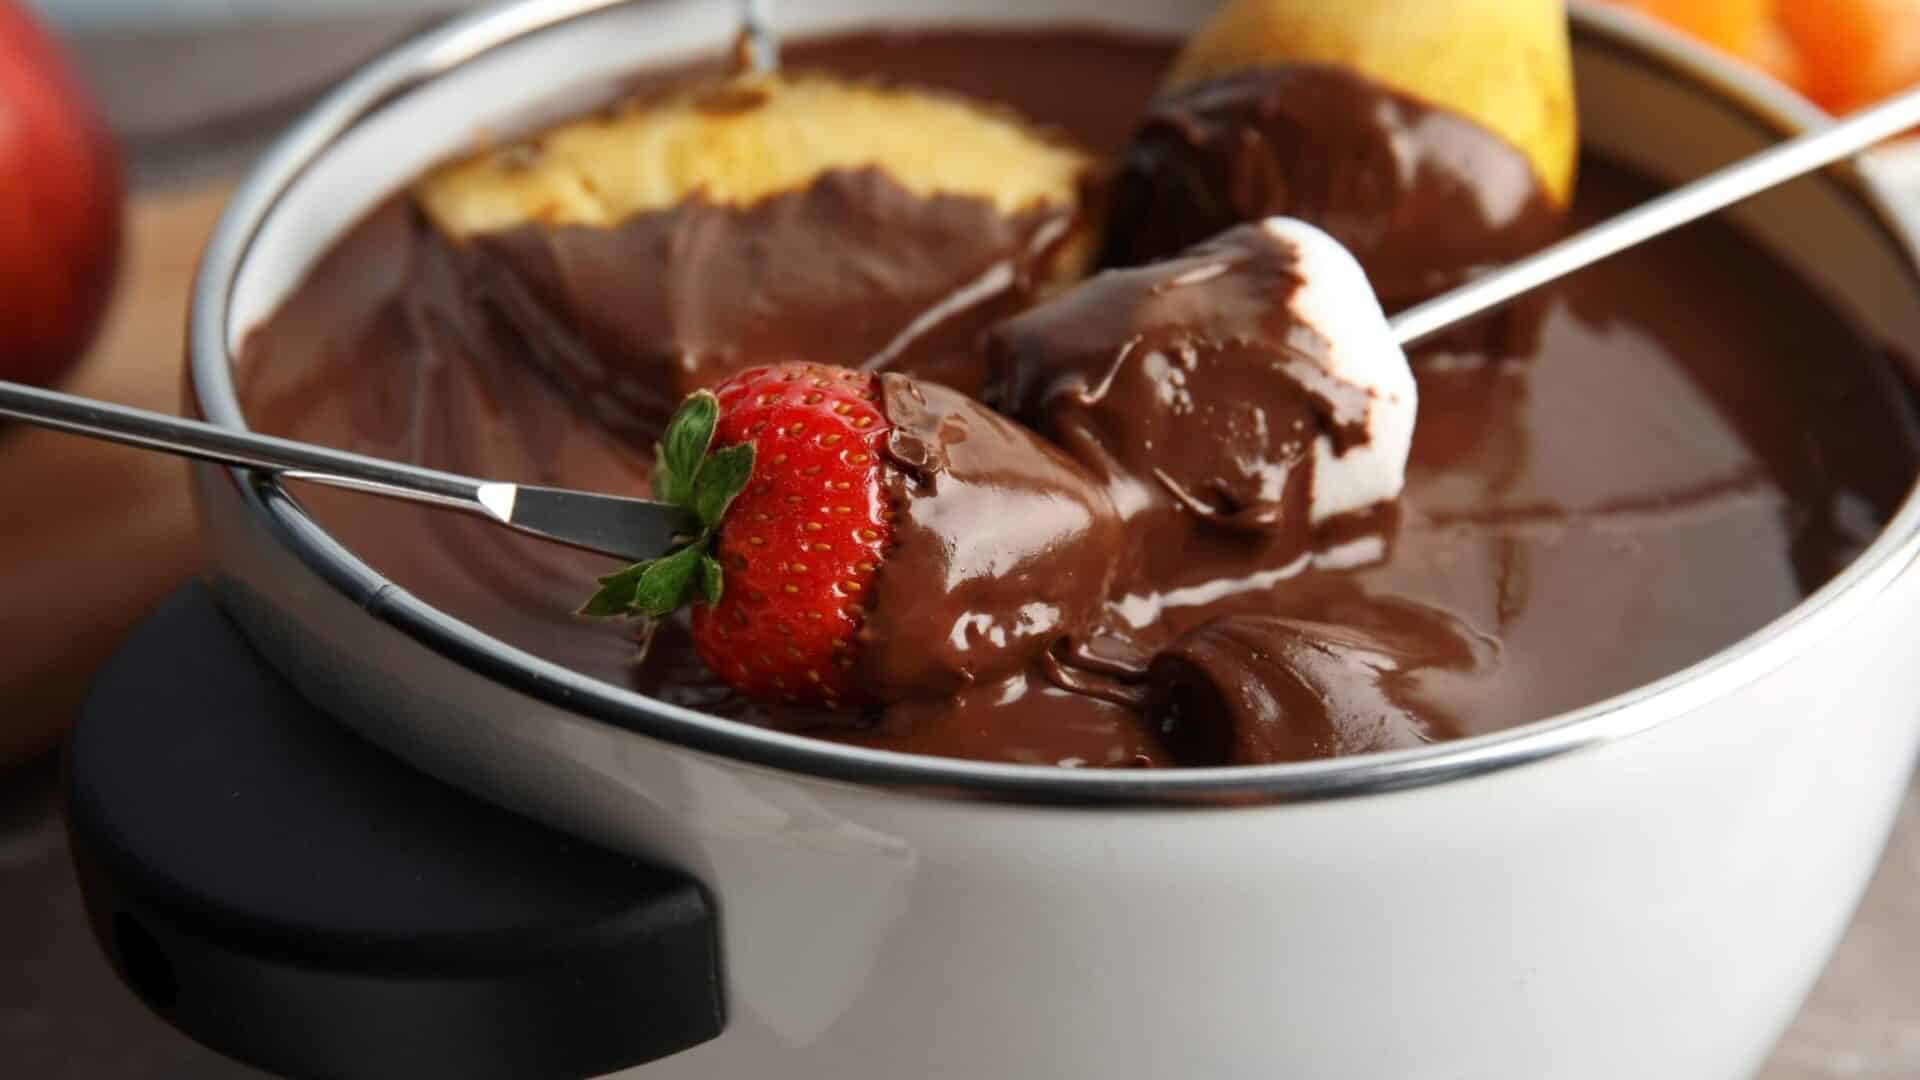 Melted dark chocolate with strawberries, bananas and oranges slices dipped in it.